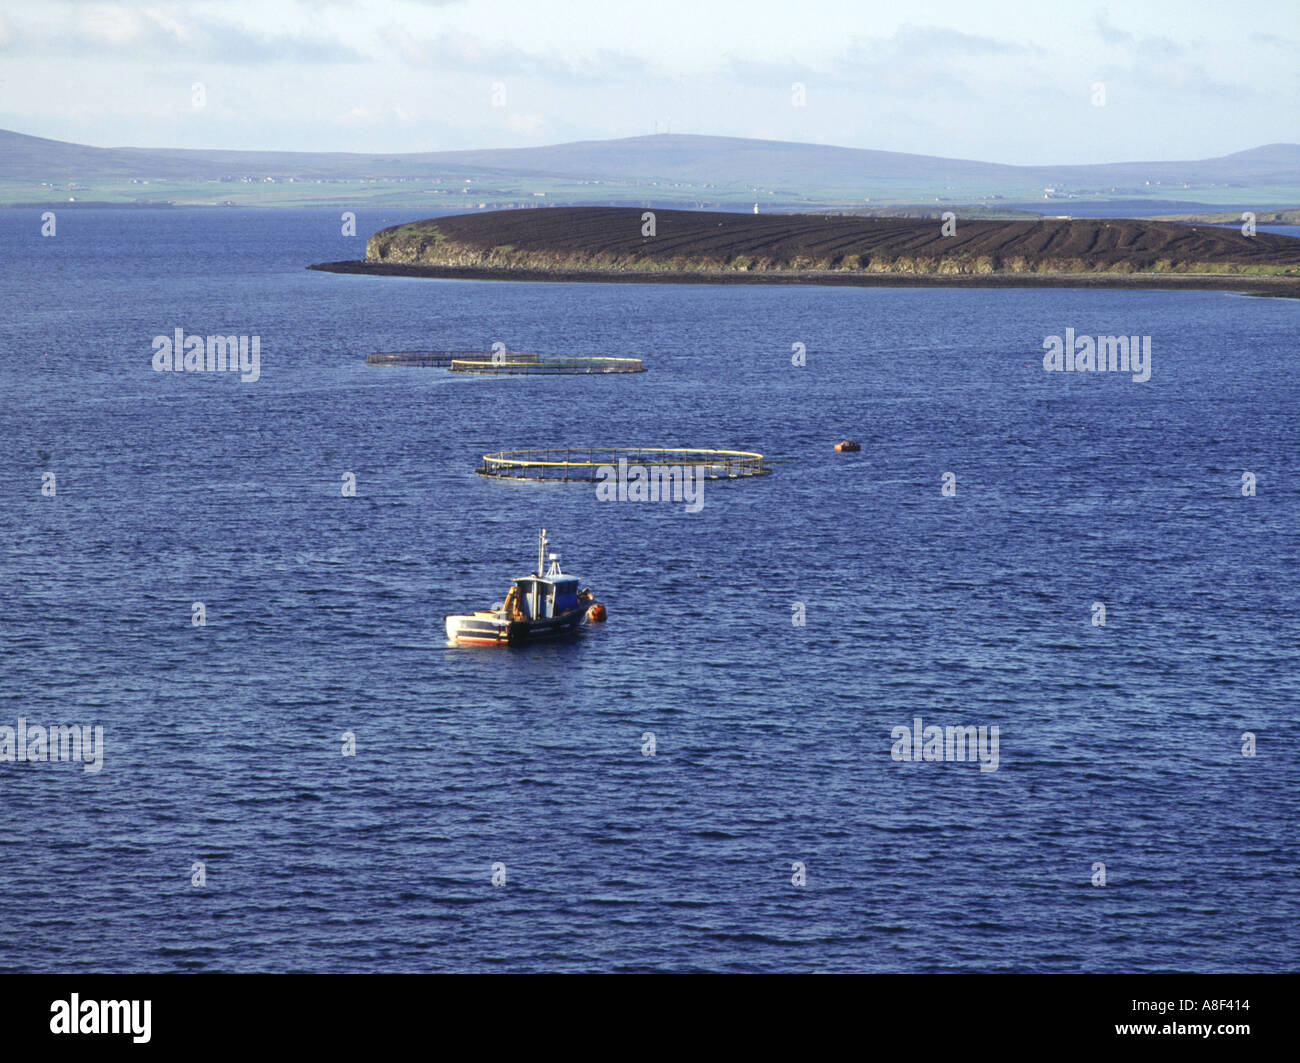 dh Rysa Salmon ORKNEY SALMON UK Boat and fish farm cages Rysa Sound and Rysa Little islands fishing nets cage Stock Photo